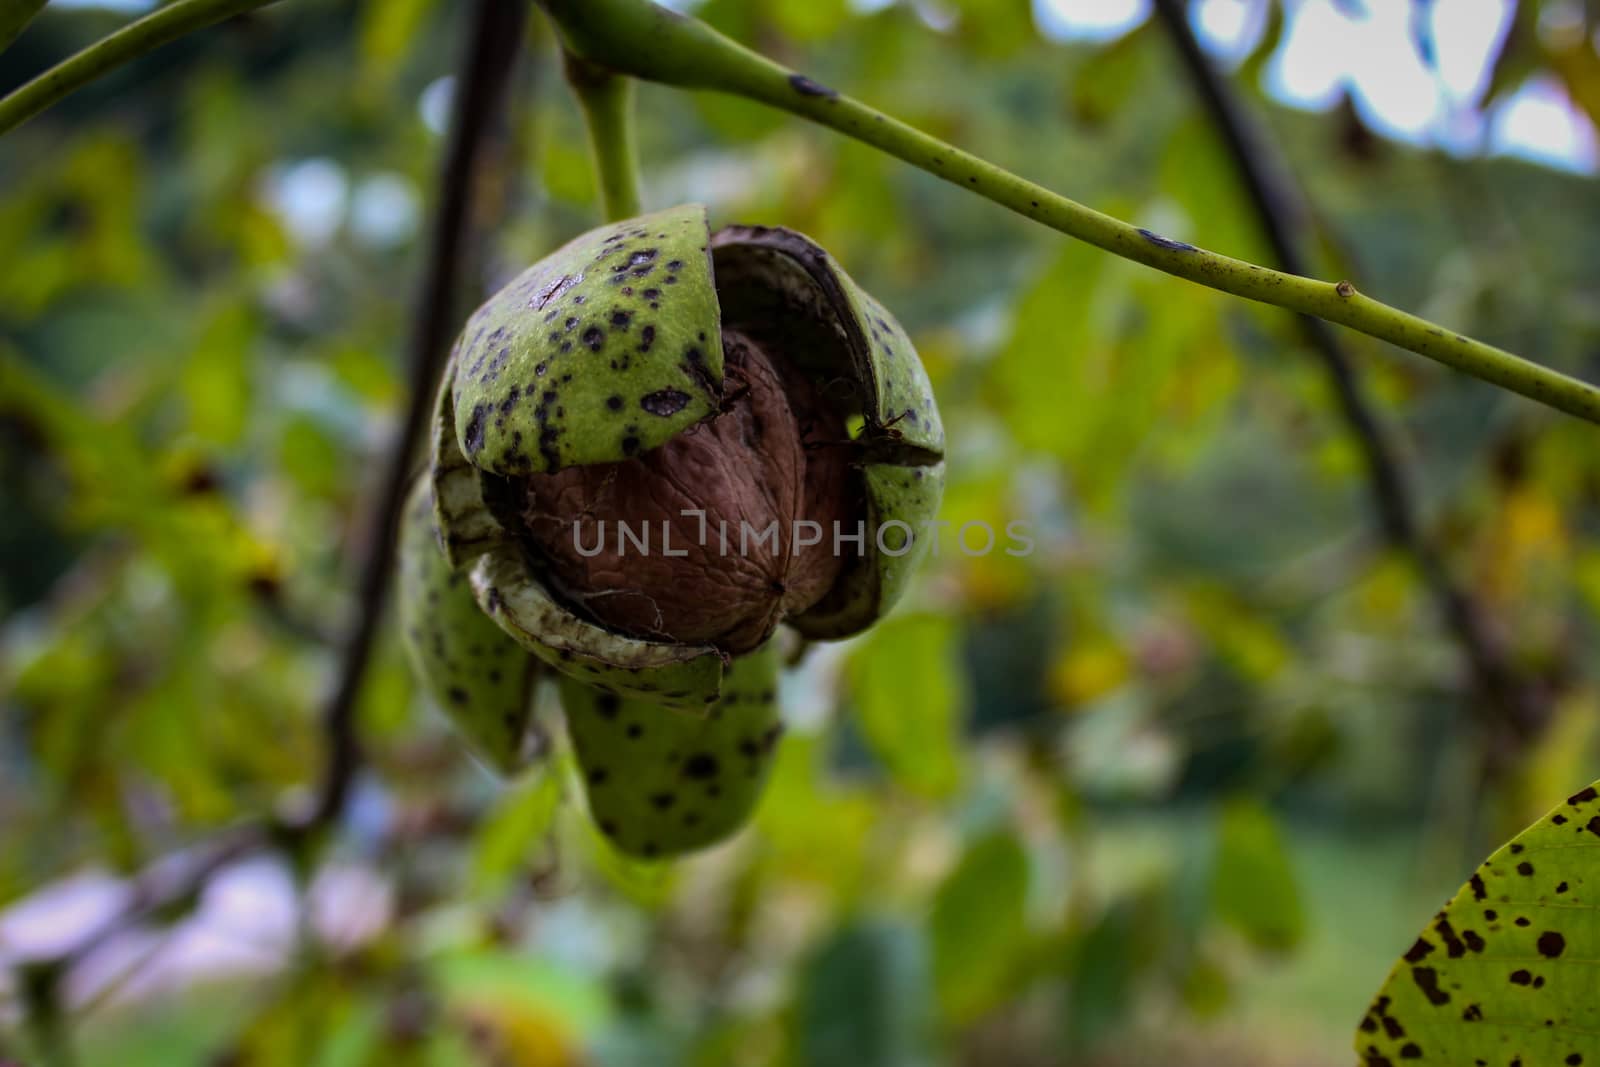 The walnut in the shell almost fell out. by mahirrov